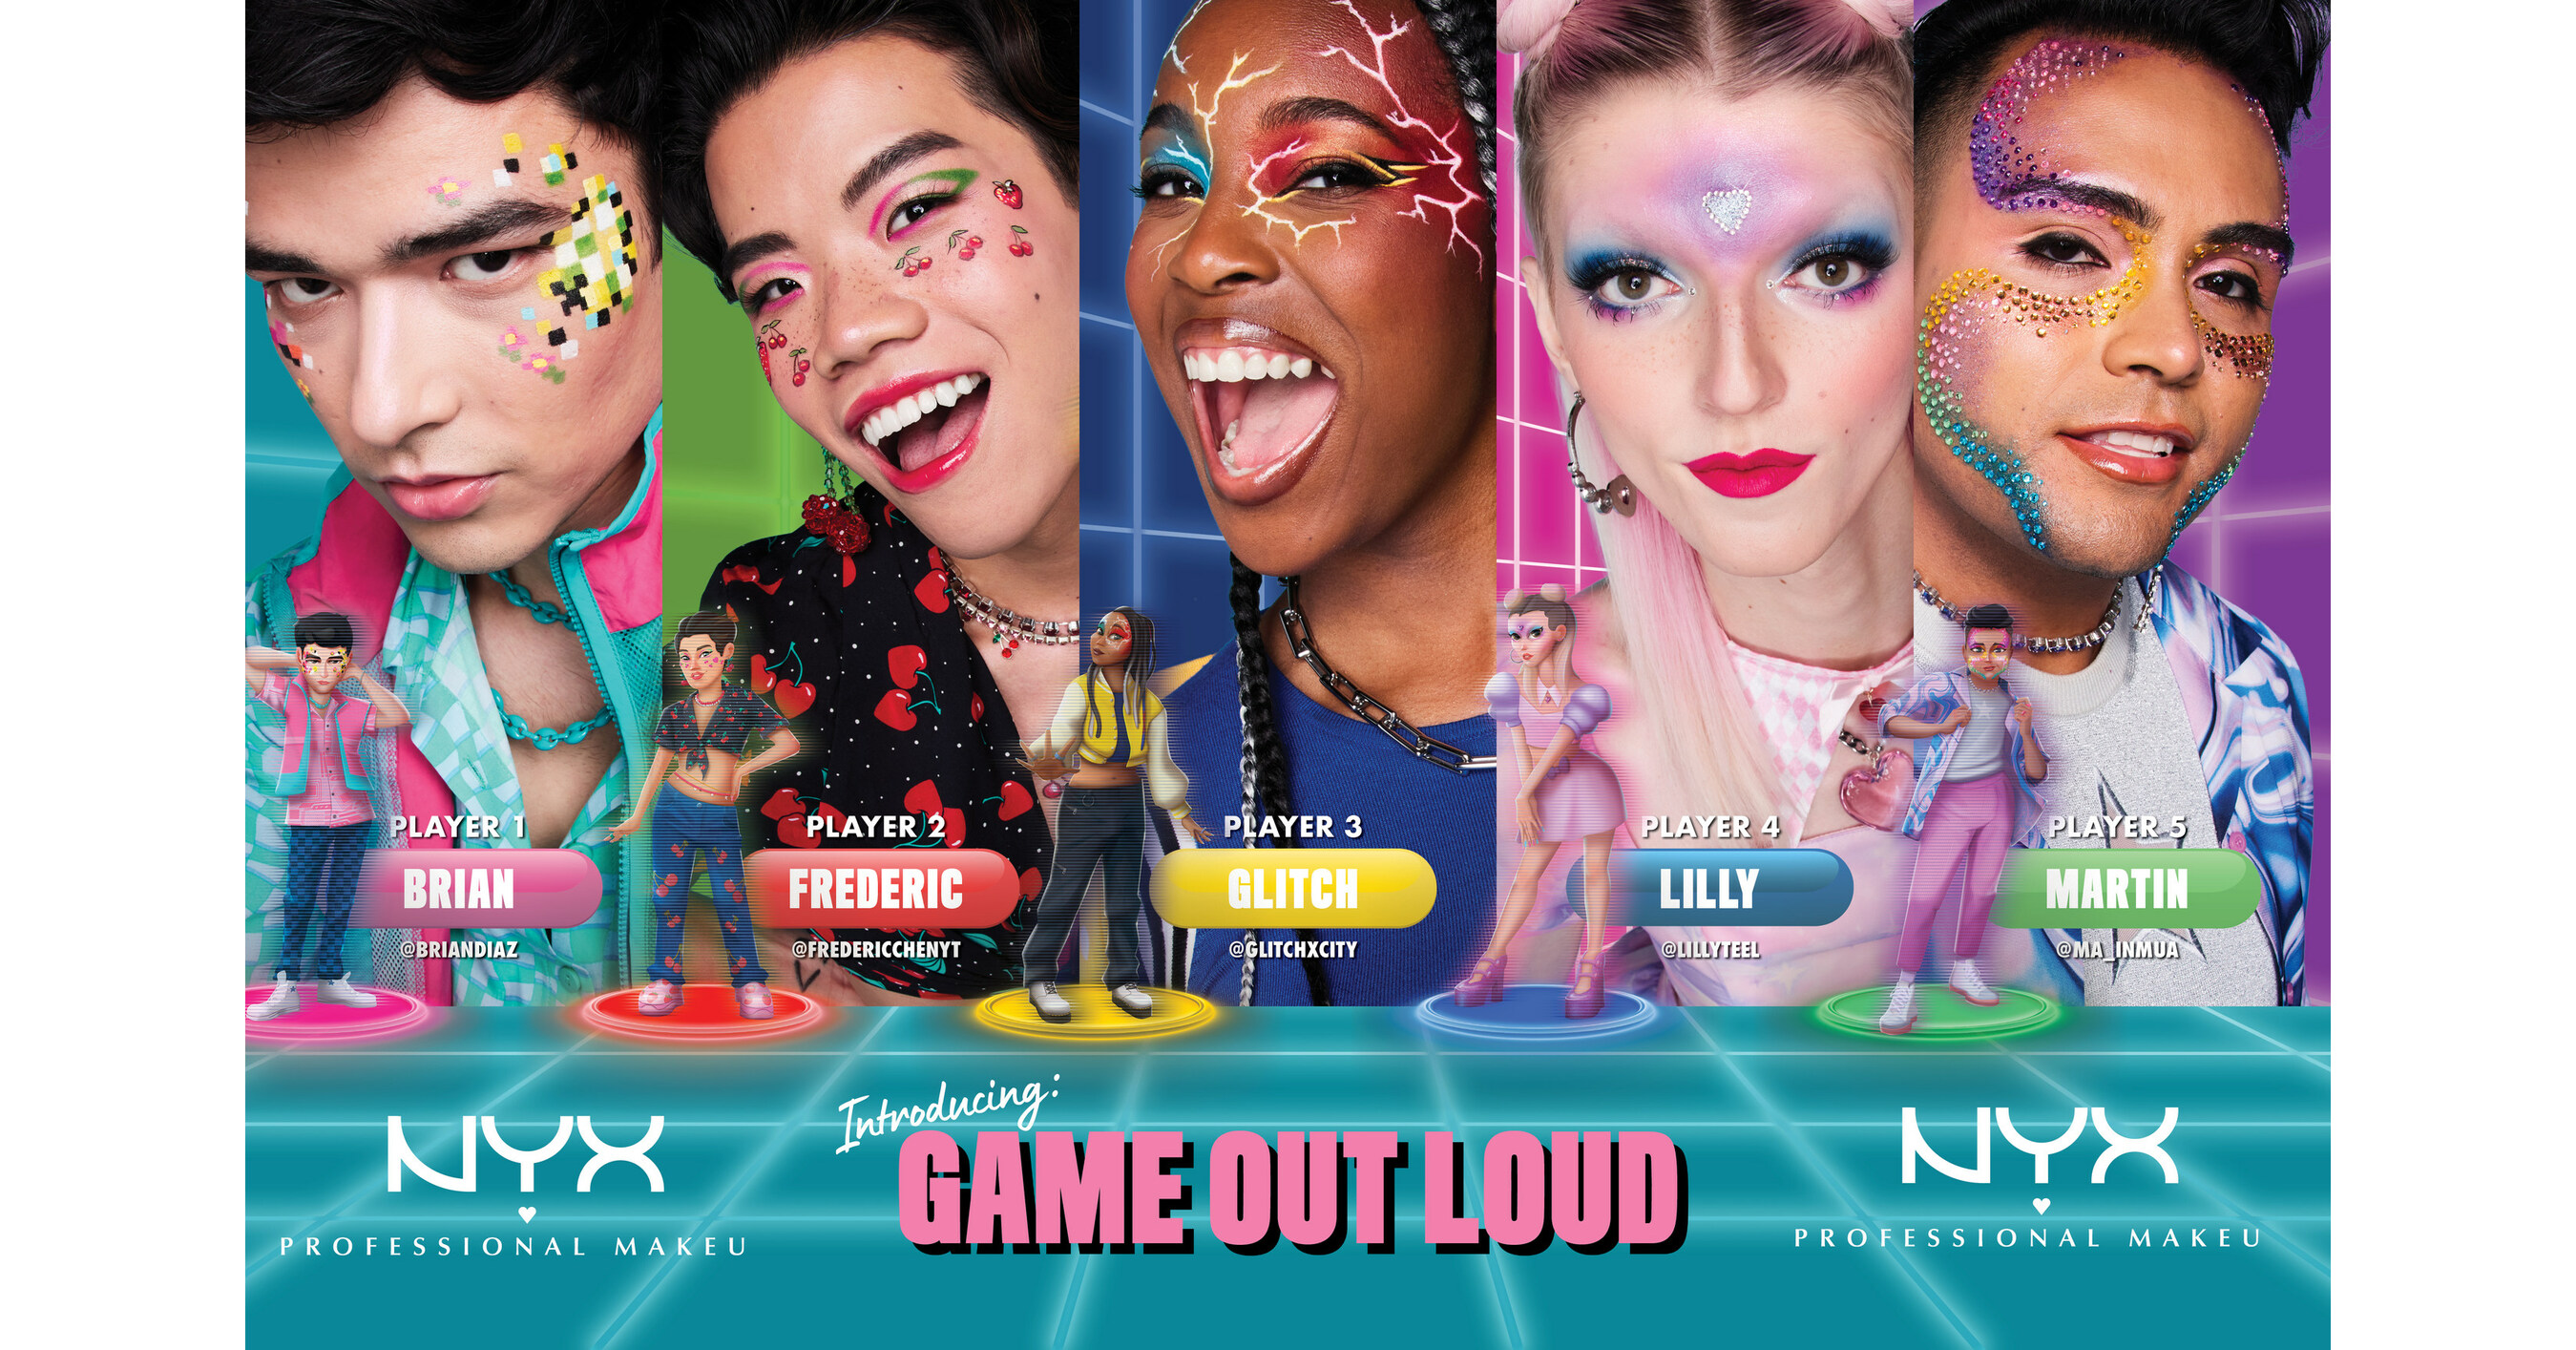 NYX PROFESSIONAL MAKEUP AIMS TO TARGET ANTI-BULLYING WITH NEW 'GAME OUT  LOUD' PRIDE CAMPAIGN